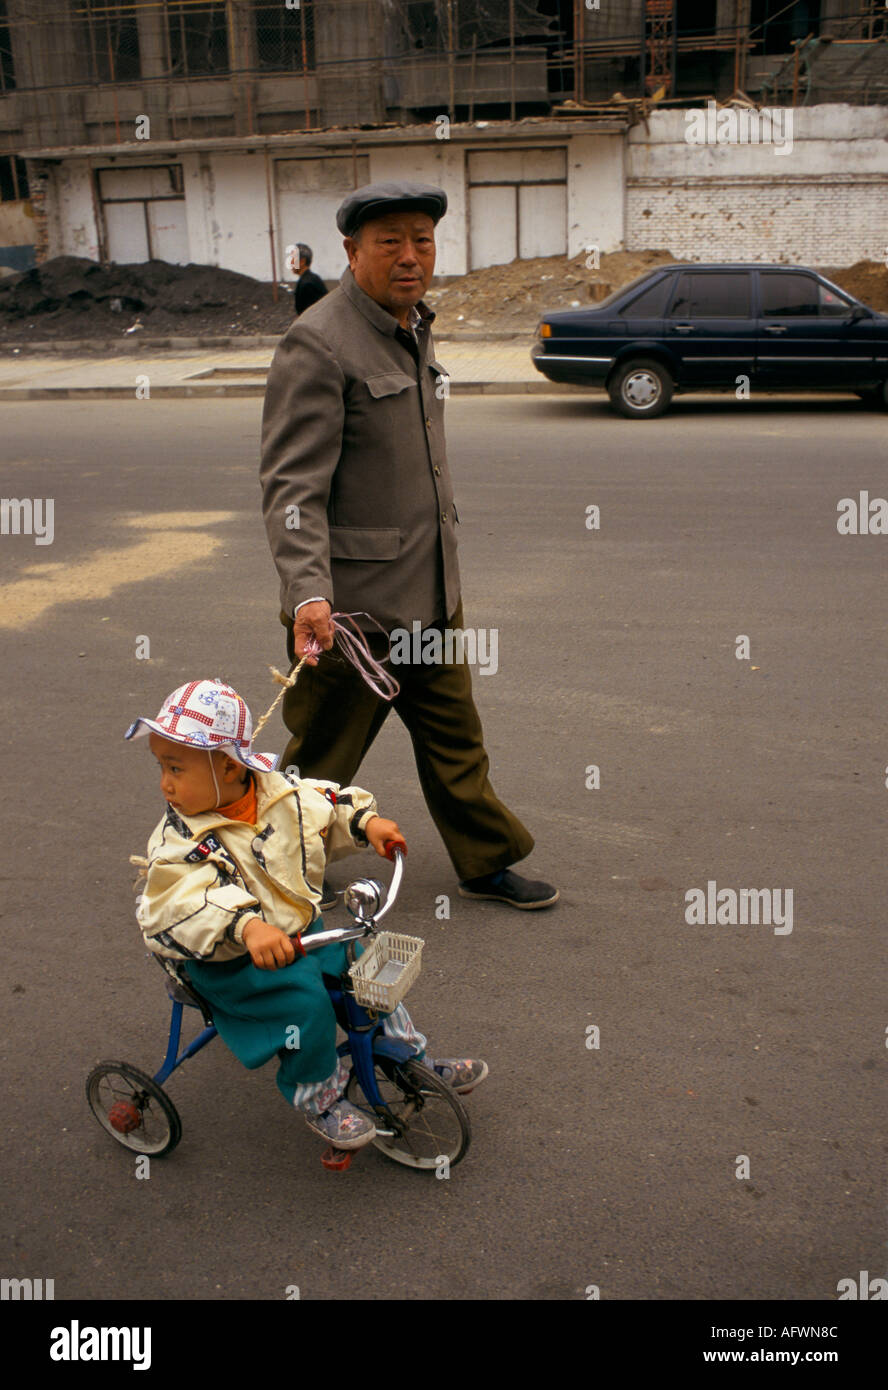 Beijing China 1998. Father and son daily life. Child in tricycle held on a rein by his dad. HOMER SYKES Stock Photo